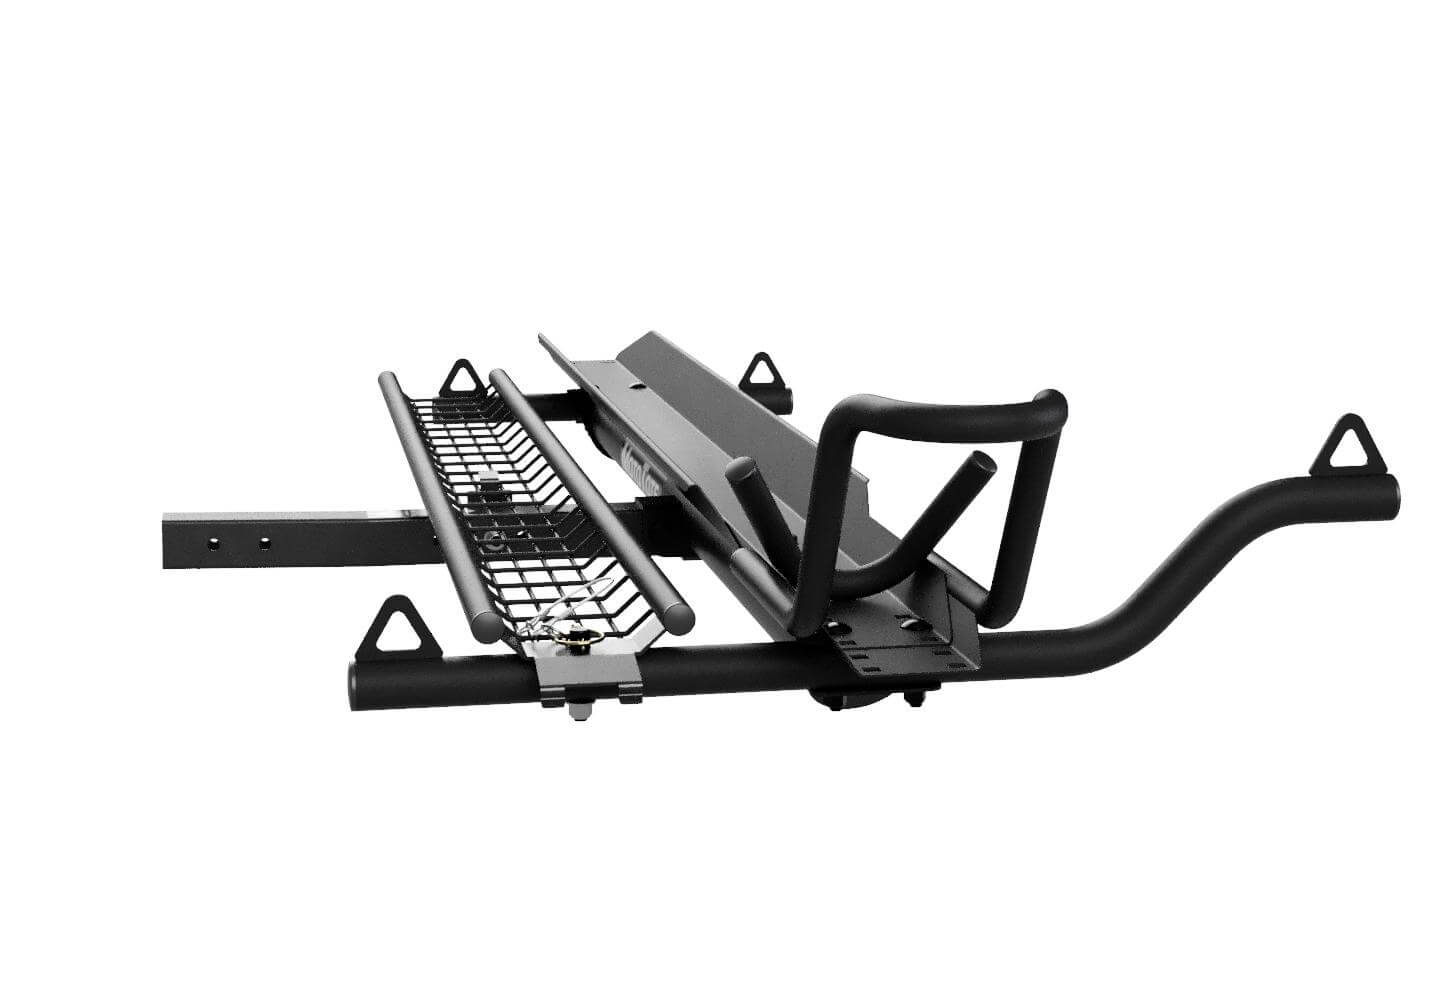 MotoTote m3 Trailer Hitch Motorcycle Carrier - BroadPull Tie Down Arms